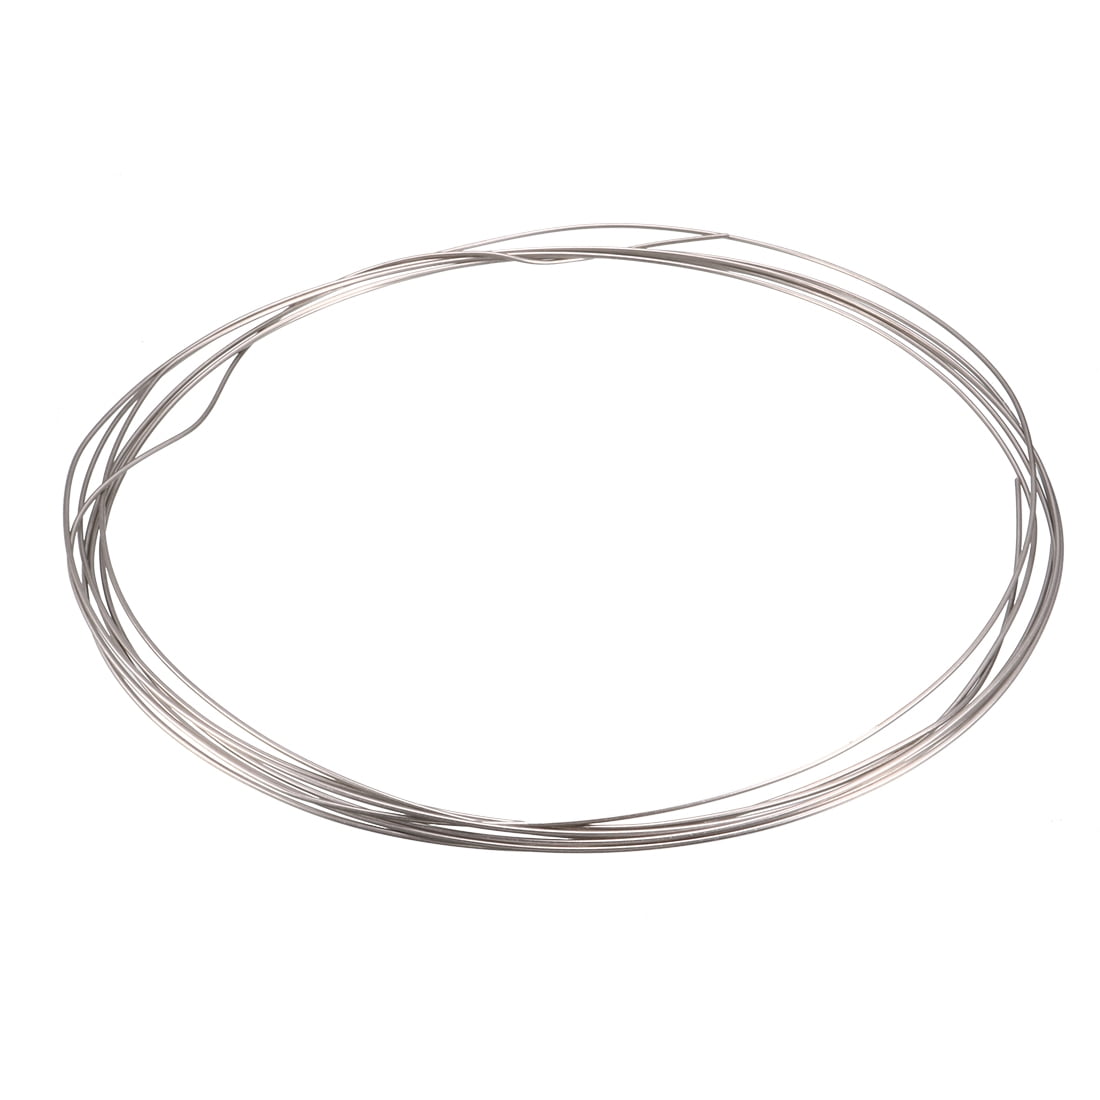 22 AWG Nichrome 80 Resistance Wire - 7 Sizes